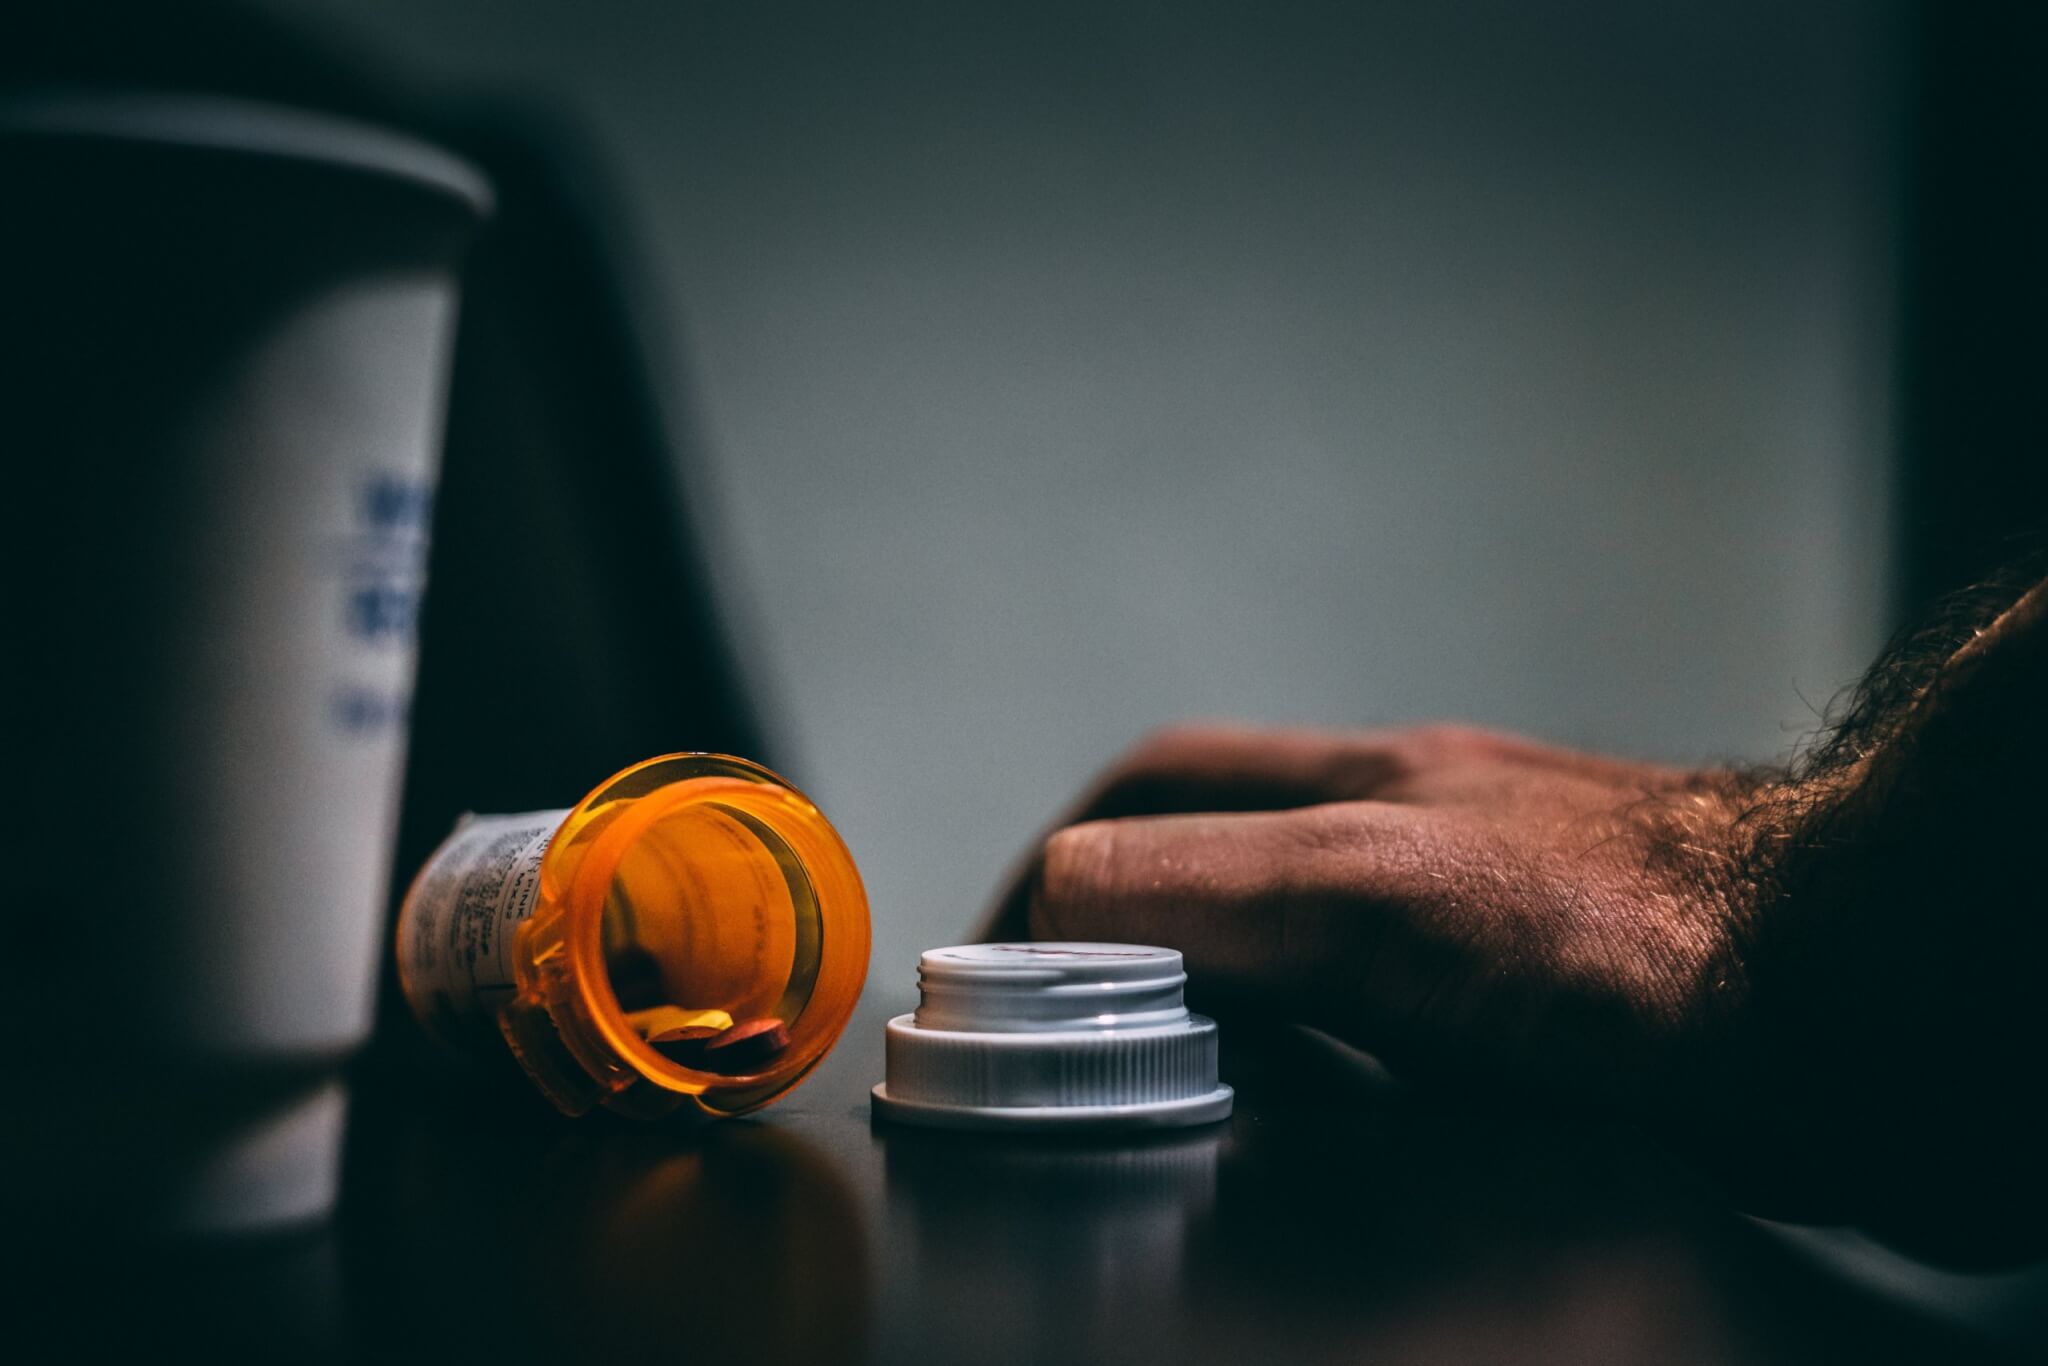 Photo by addicted to prescriptions | Kevin Bidwell from Pexels